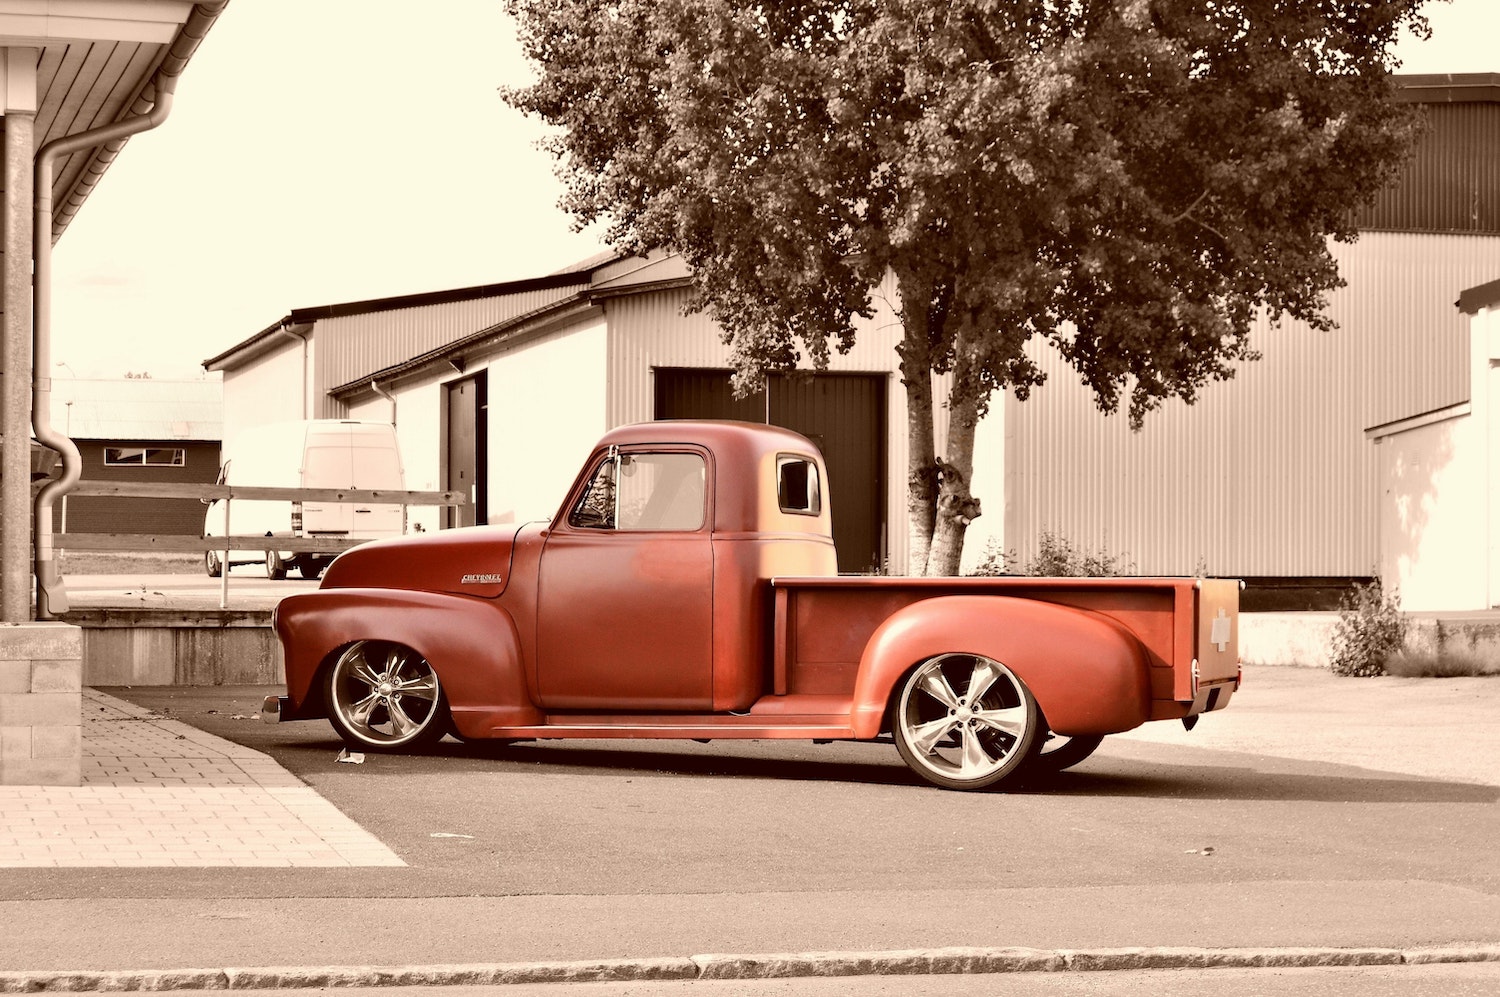 A classic red Chevrolet stepside pickup truck parked in front of a tree, in a parking lot.